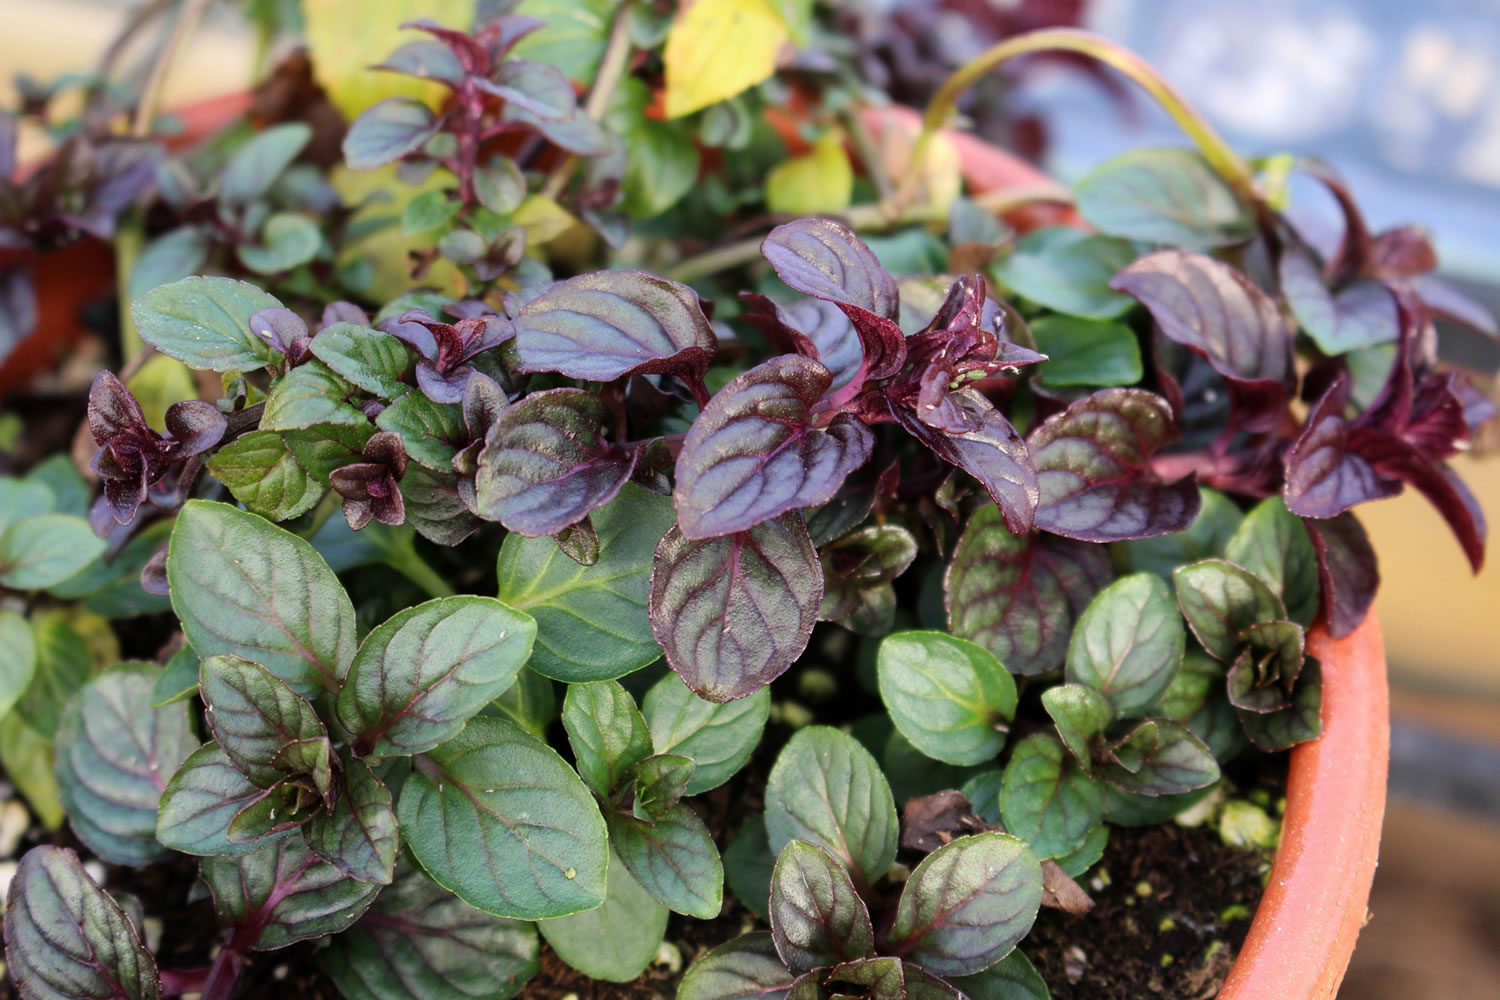 Chocolate mint peppermint grows in a pot in New Paltz, N.Y.